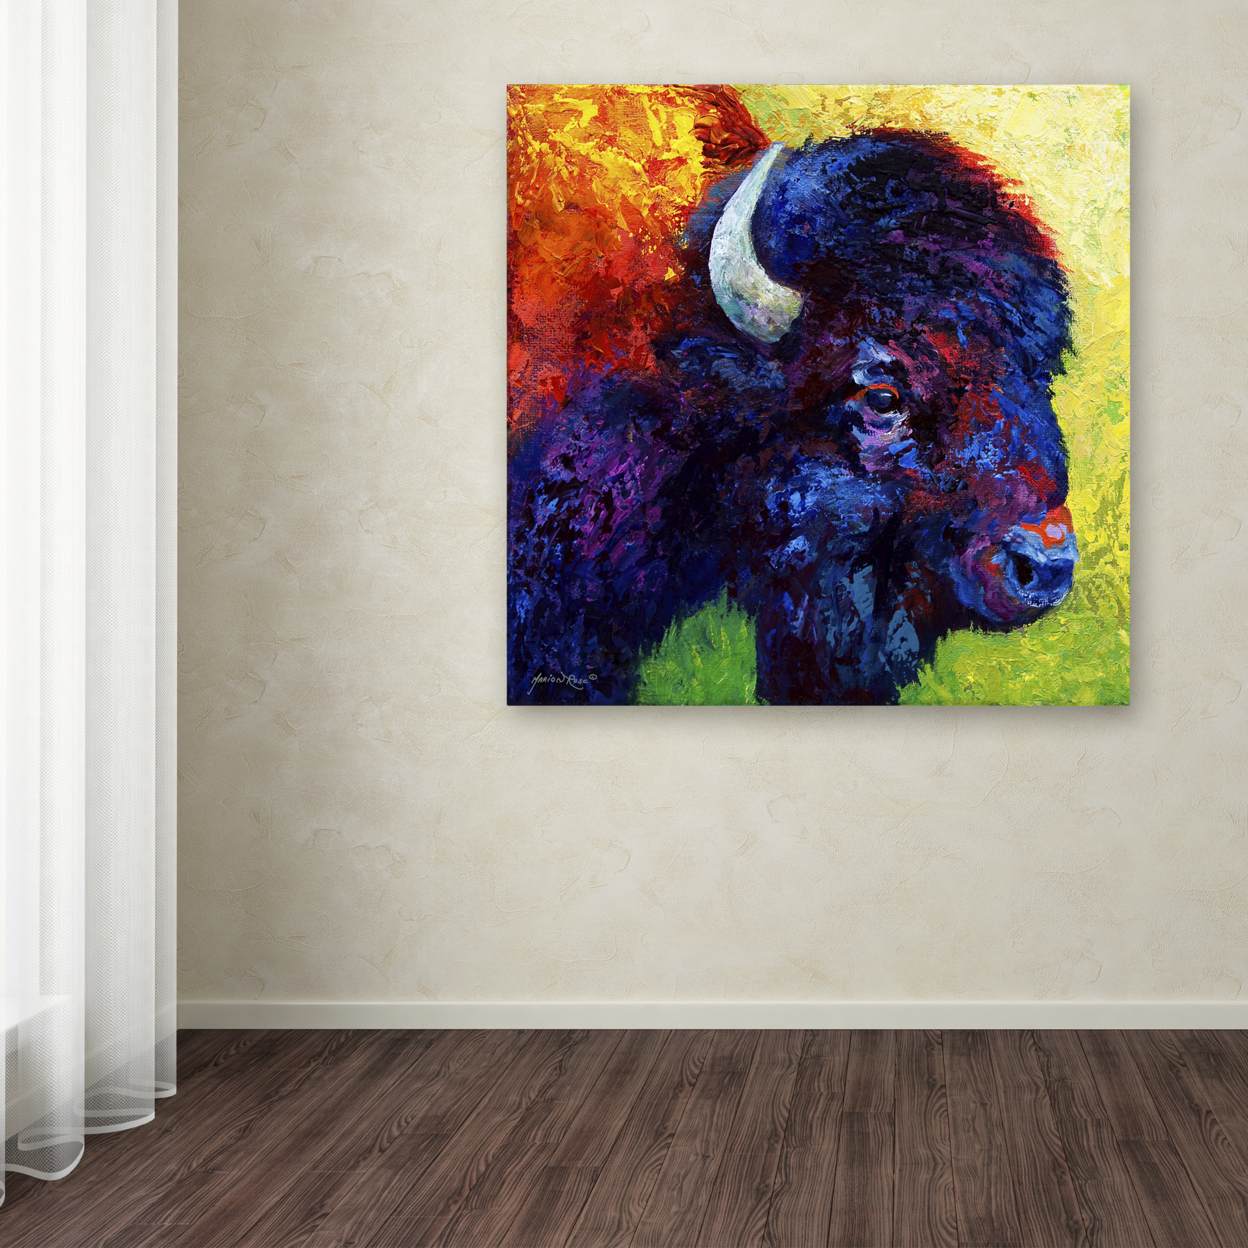 Marion Rose 'Bison Head III' Ready To Hang Canvas Art 24 X 24 Inches Made In USA